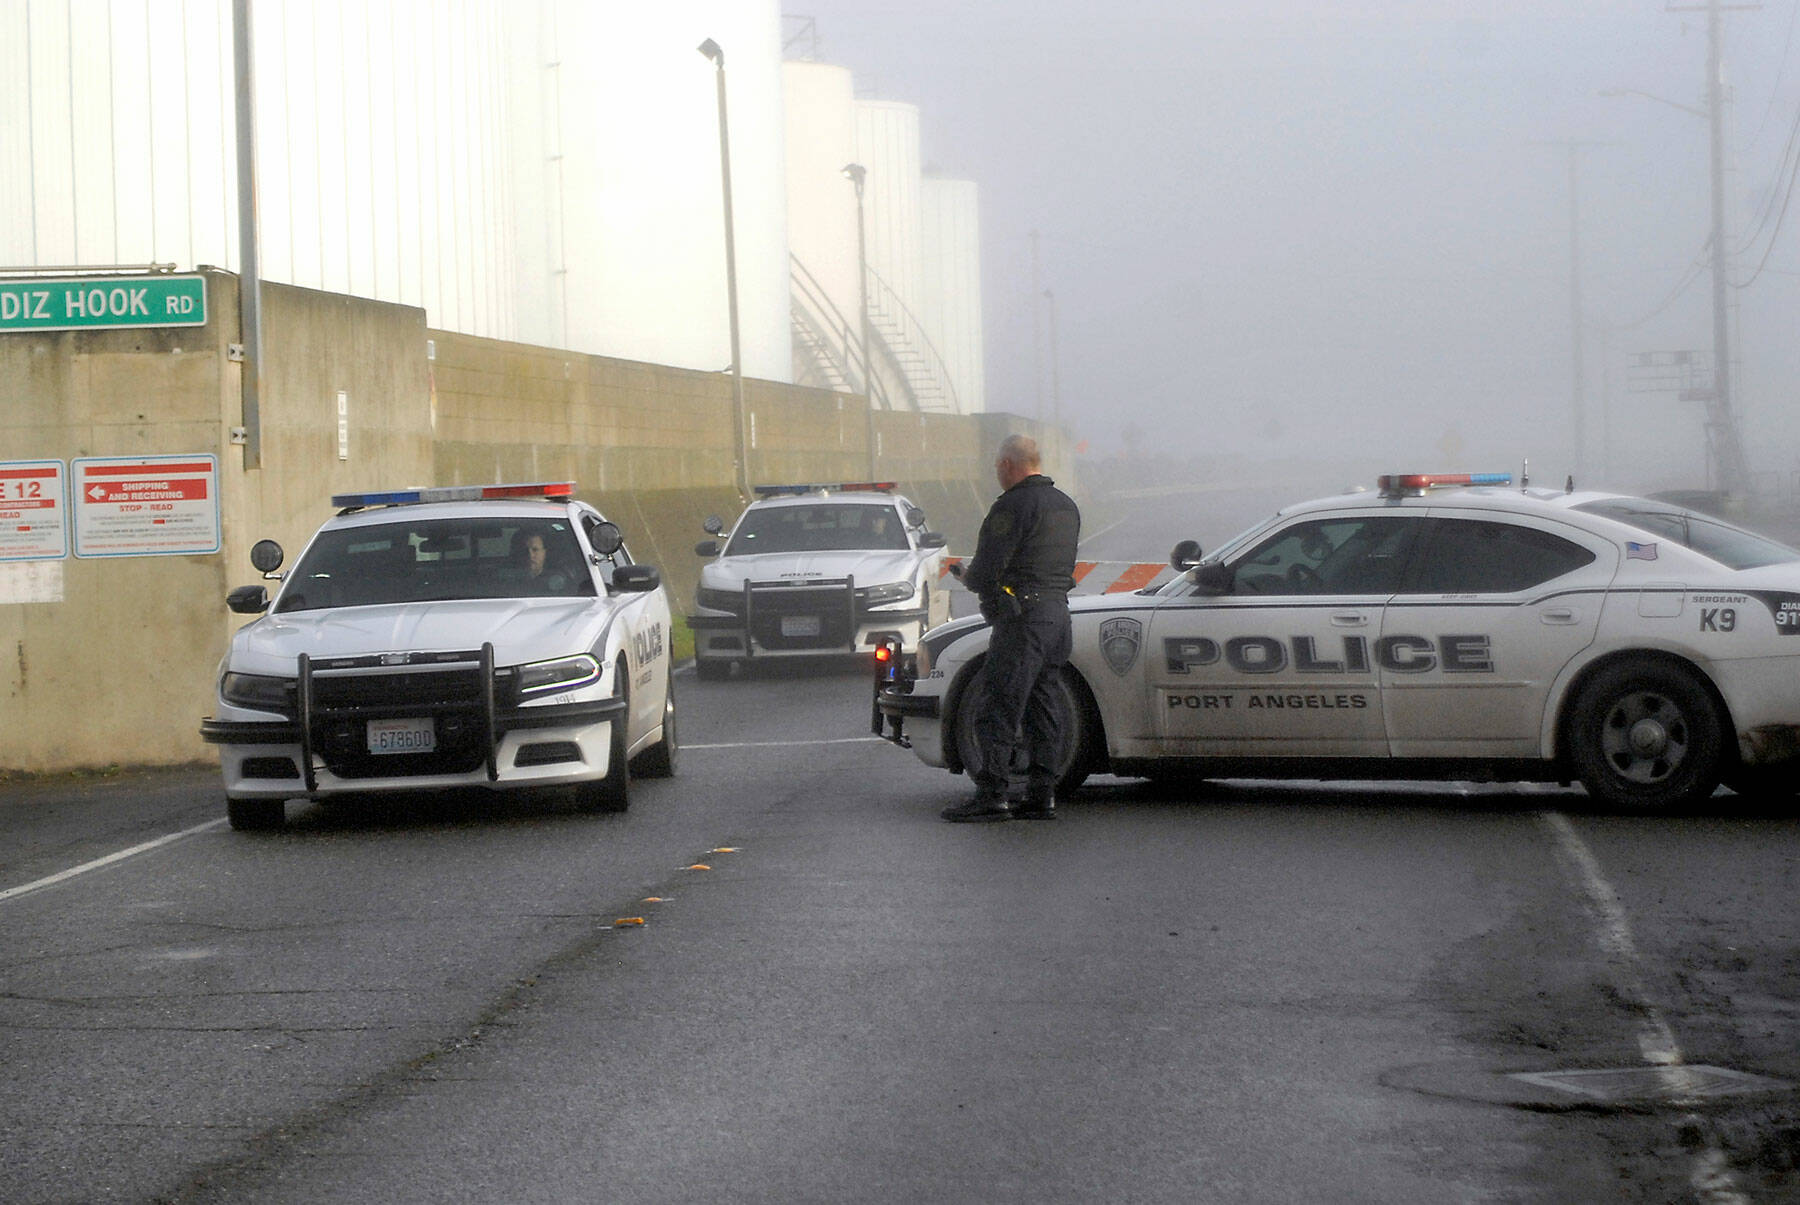 Keith Thorpe/Peninsula Daily News
Port Angeles police Sgt. Kevin Miller blocks the entrance to Ediz Hook Road along Port Angeles Harbor as two police cars leave the area after the hook was evacuated of civilians during a tsunami advisory Saturday morning.